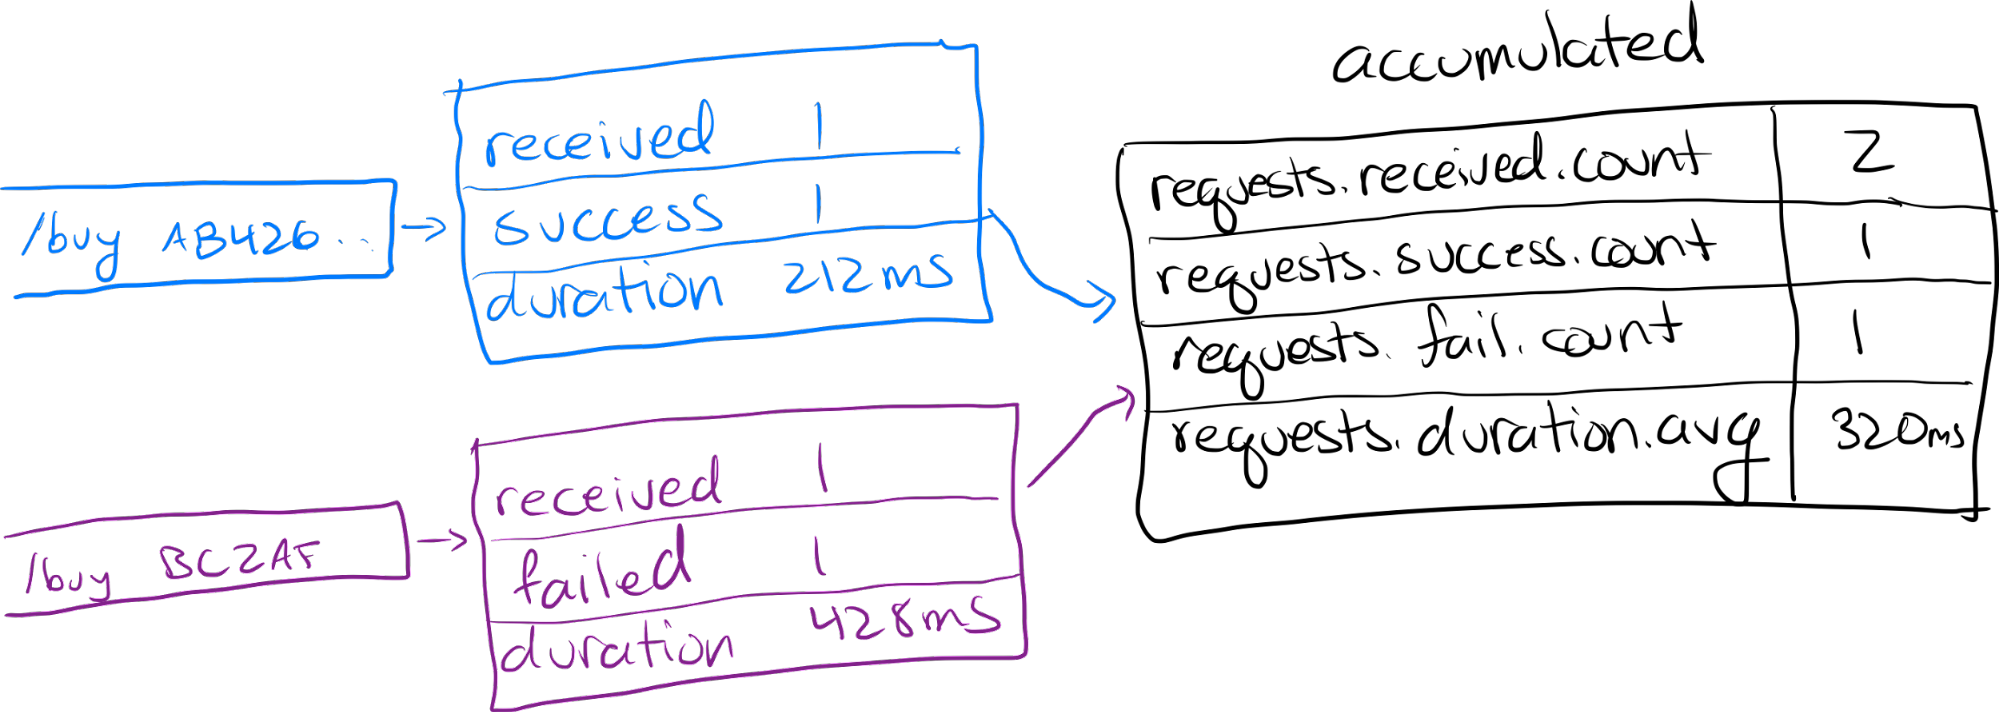 Figure 2 shows additional incoming requests combined into a monoid with negligible memory size increase.